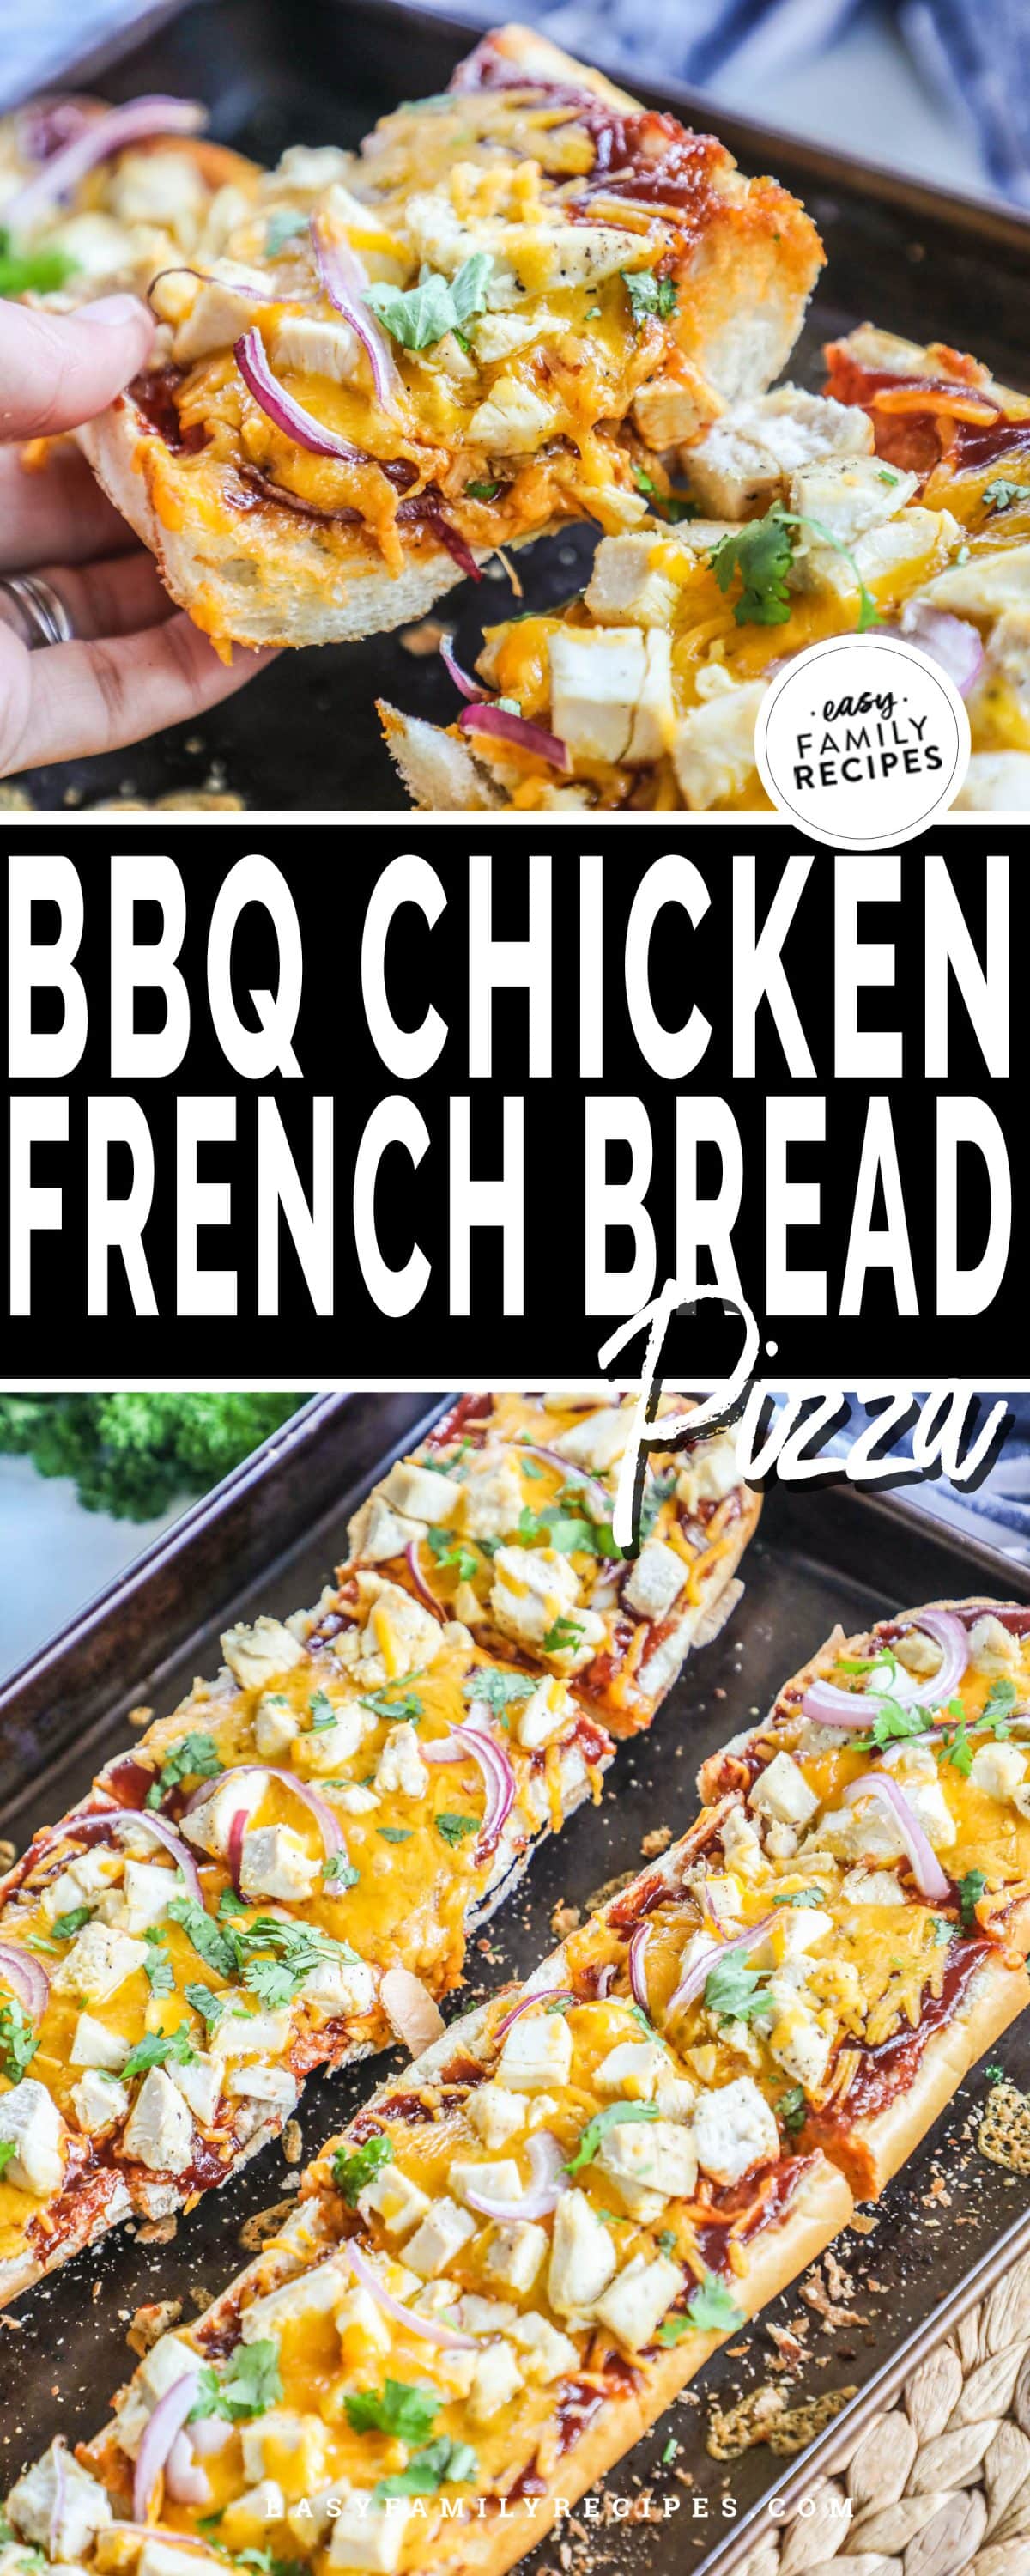 BBQ Chicken French Bread Pizza on a sheet tray and a pizza being picked up with a cheese pull.